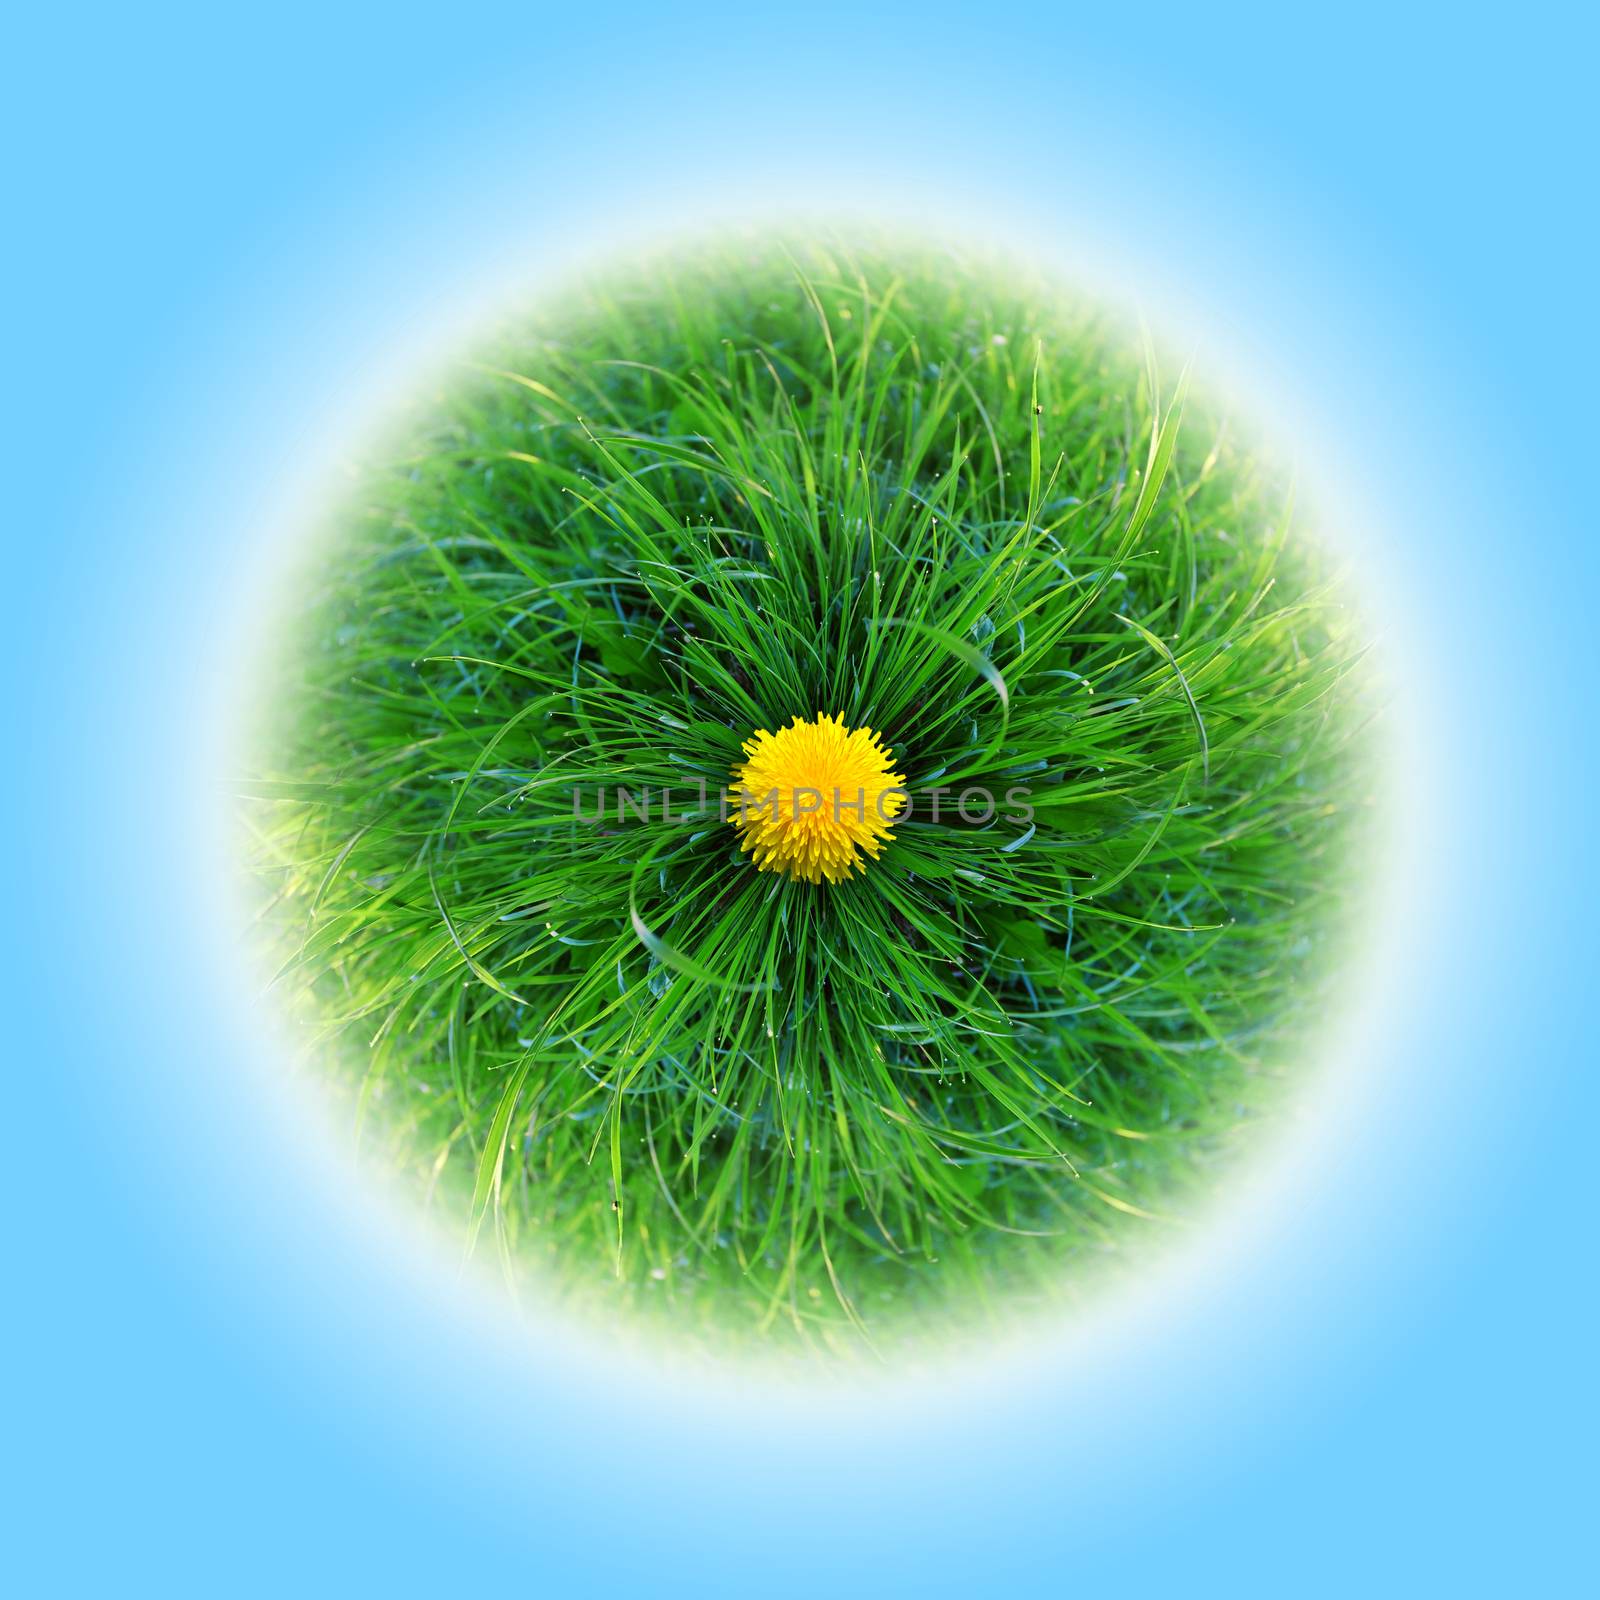 bright green planet made ??of grass, with a blue background and dandelions